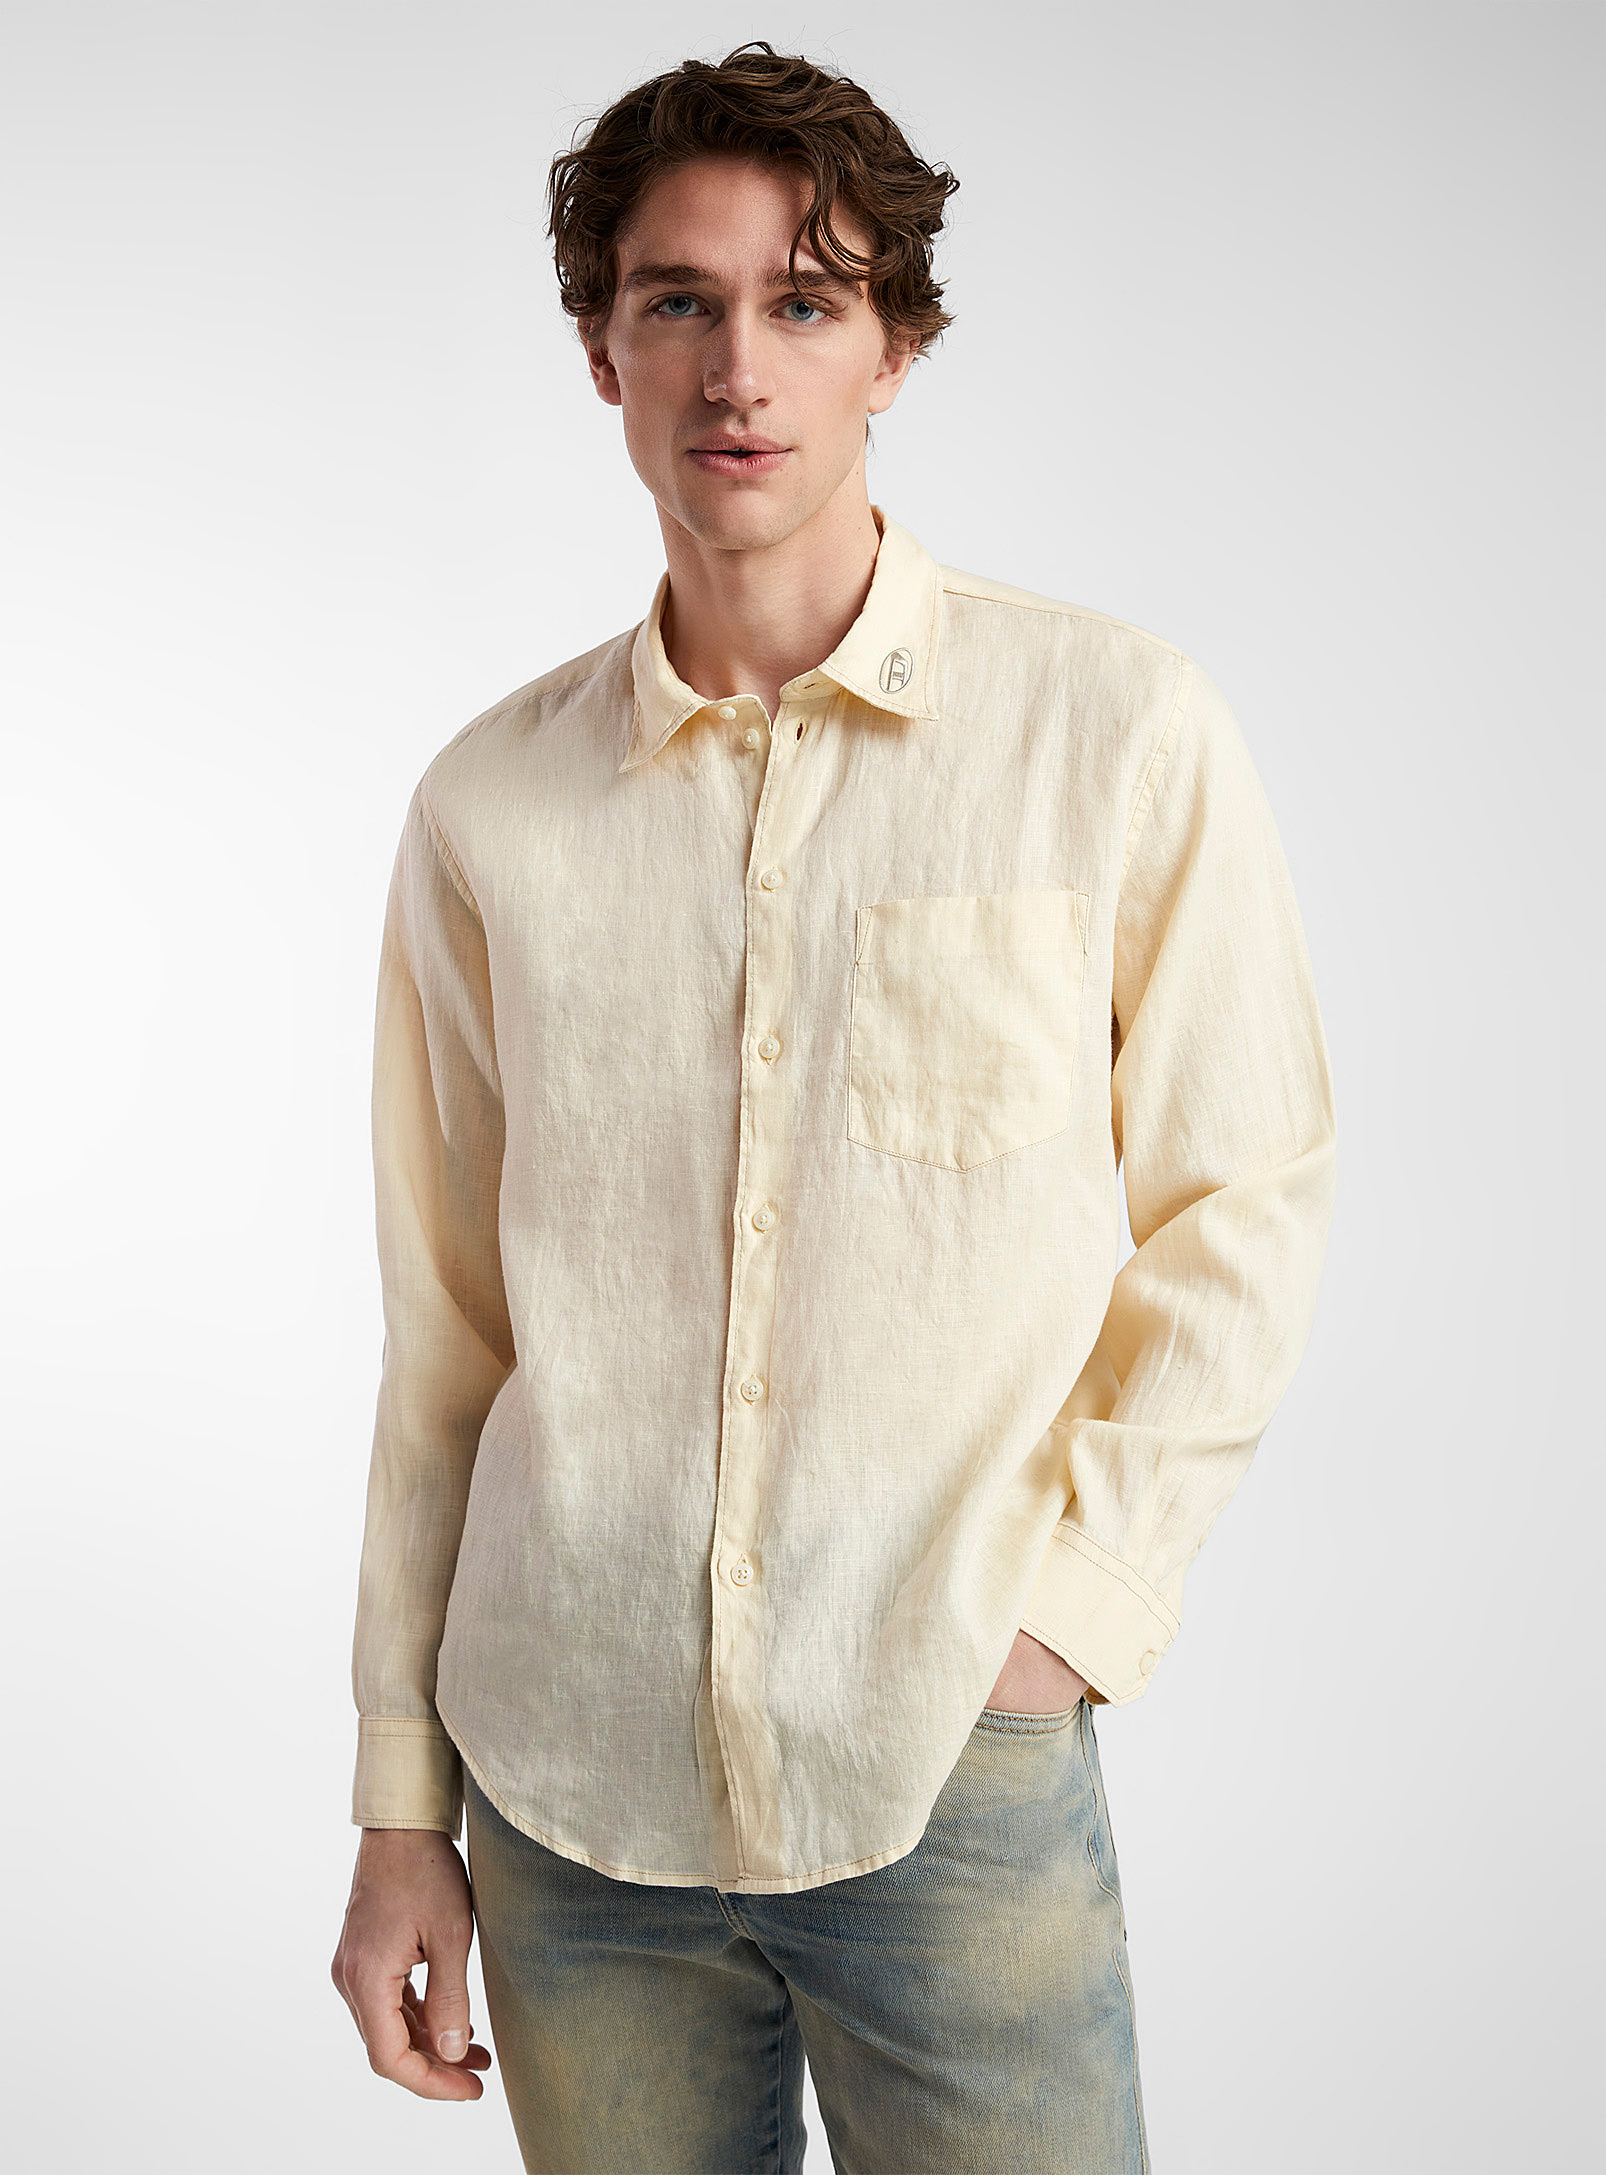 Diesel S-emil Embroidered Collar Linen Shirt In Ivory White